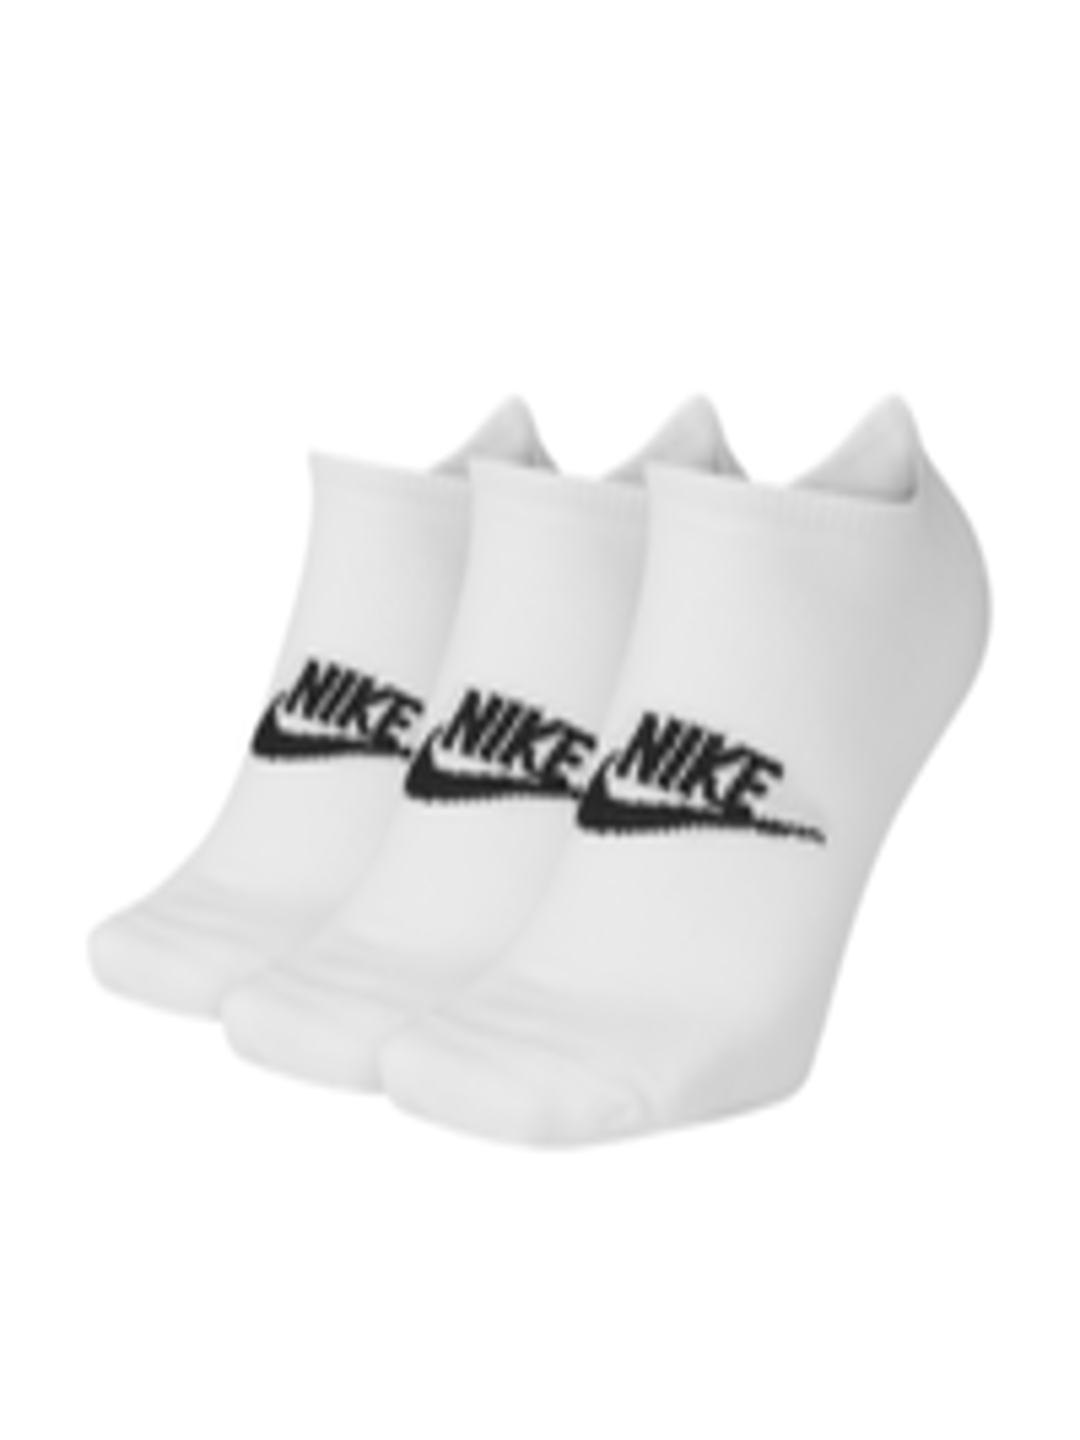 Buy Nike Unisex Pack Of 3 White Solid Everyday Essentials Shoe Liners ...